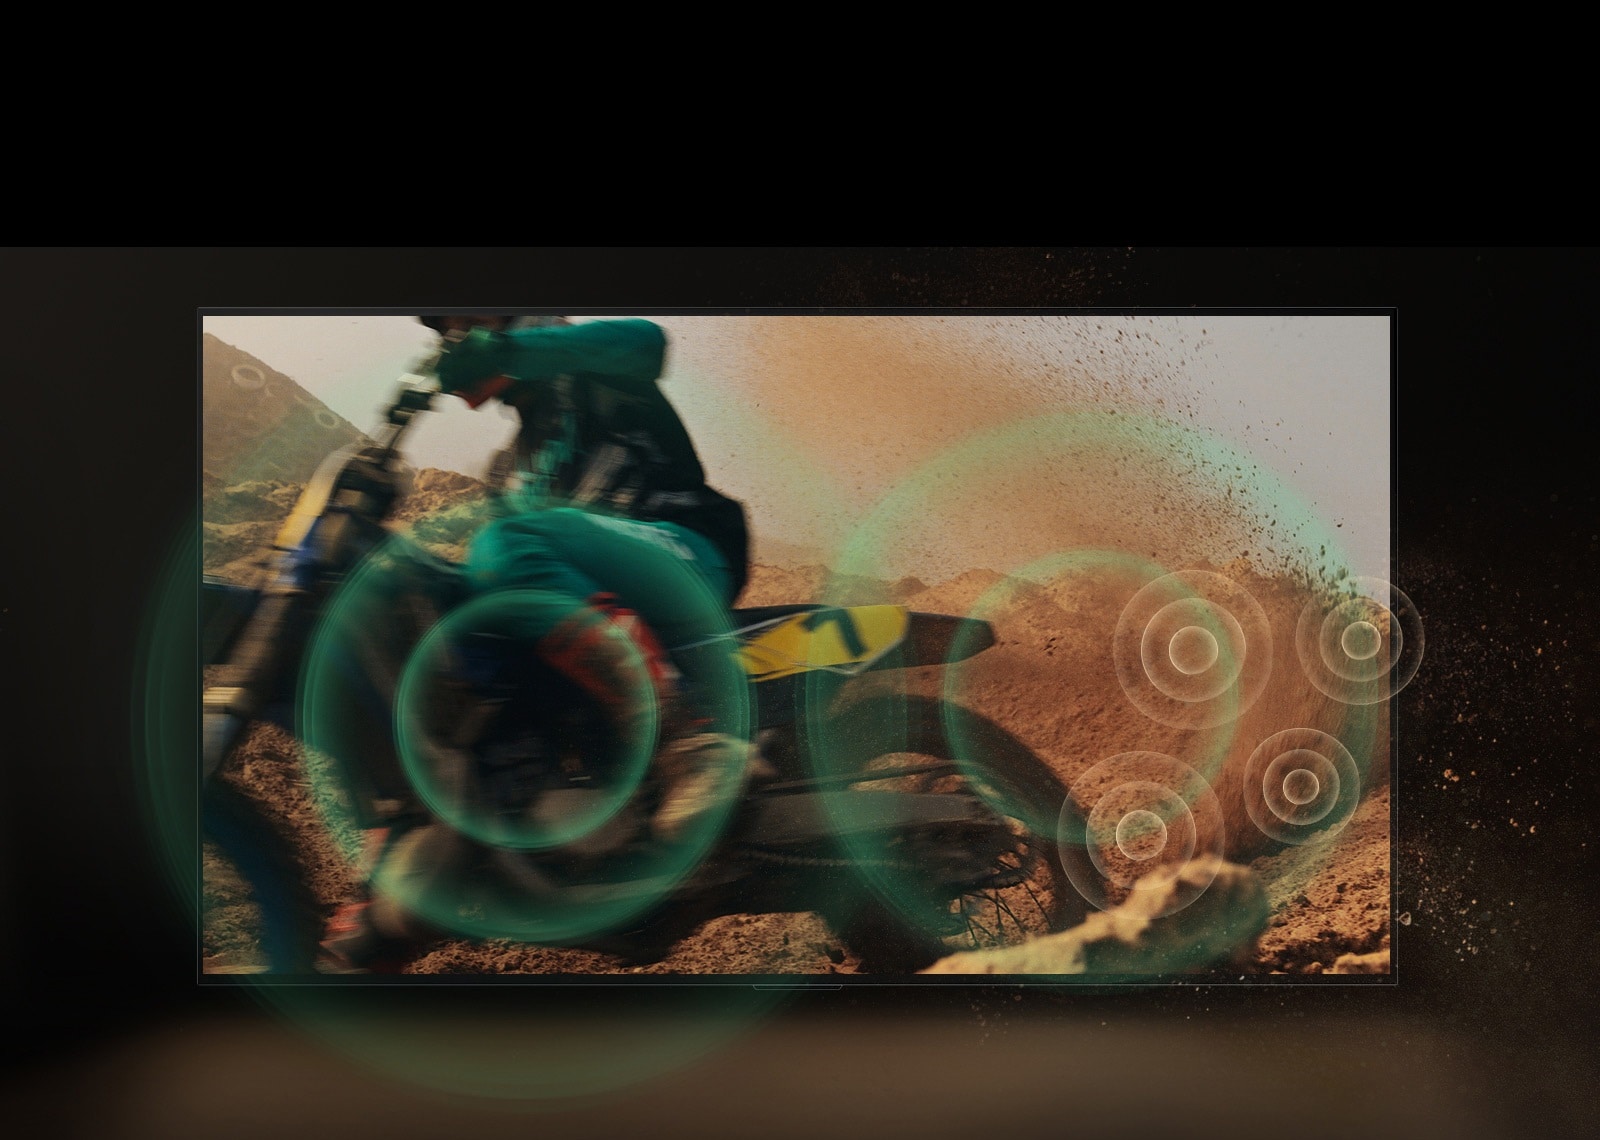 A video of a person dirt biking on red, dusty land. As they take a corner, green sound bubbles appear from the wheel.